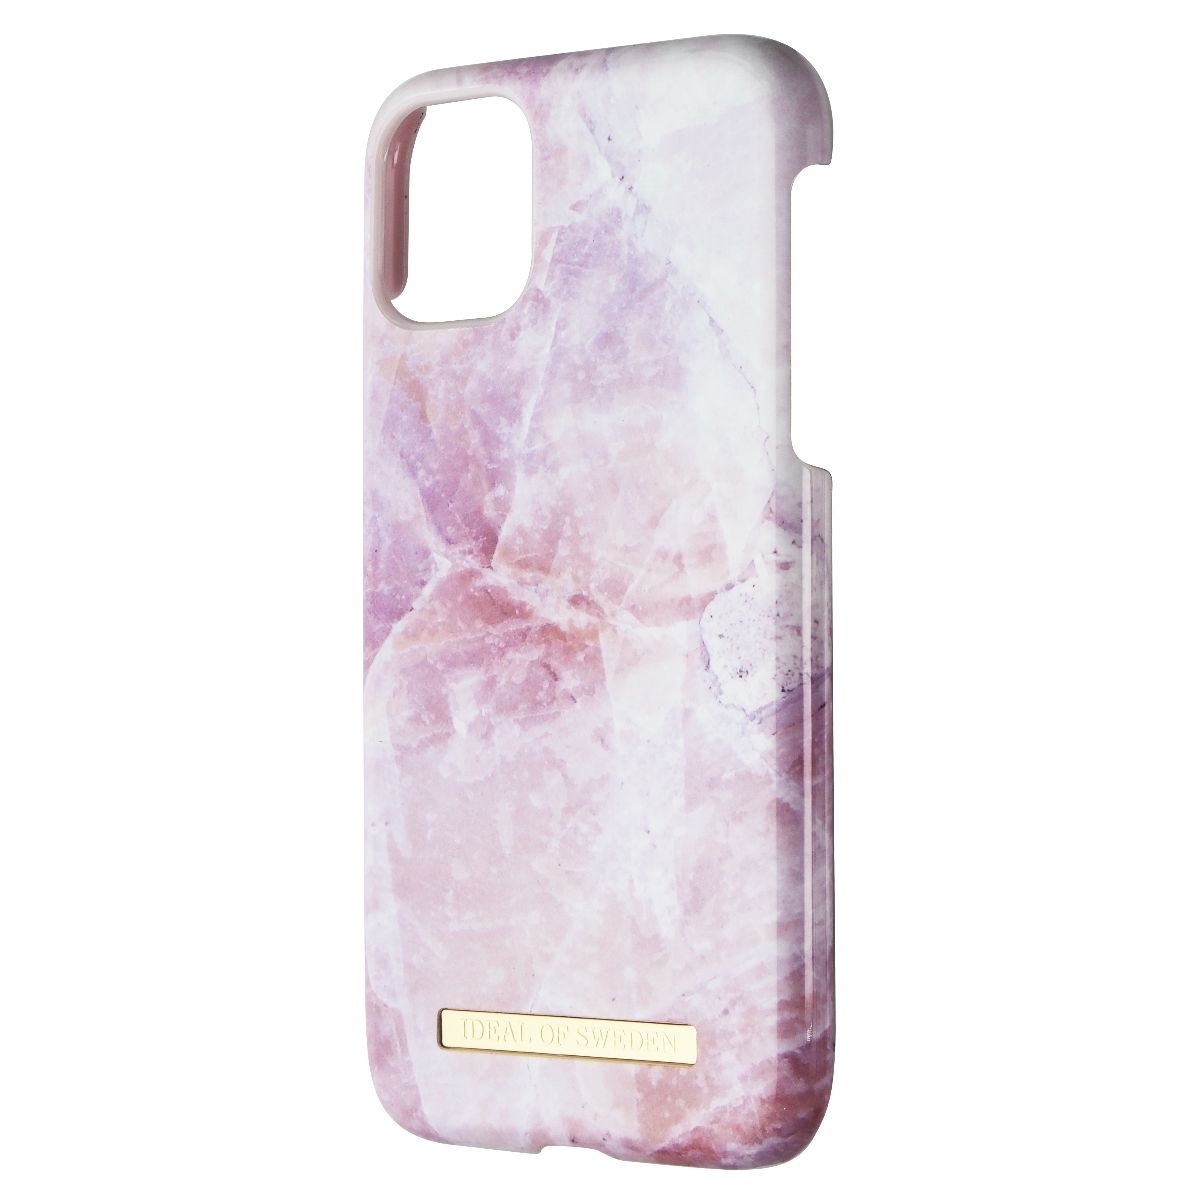 IDeal Of Sweden Hardshell Case For Apple IPhone 11 And XR - Pilion Pink Marble (Refurbished)